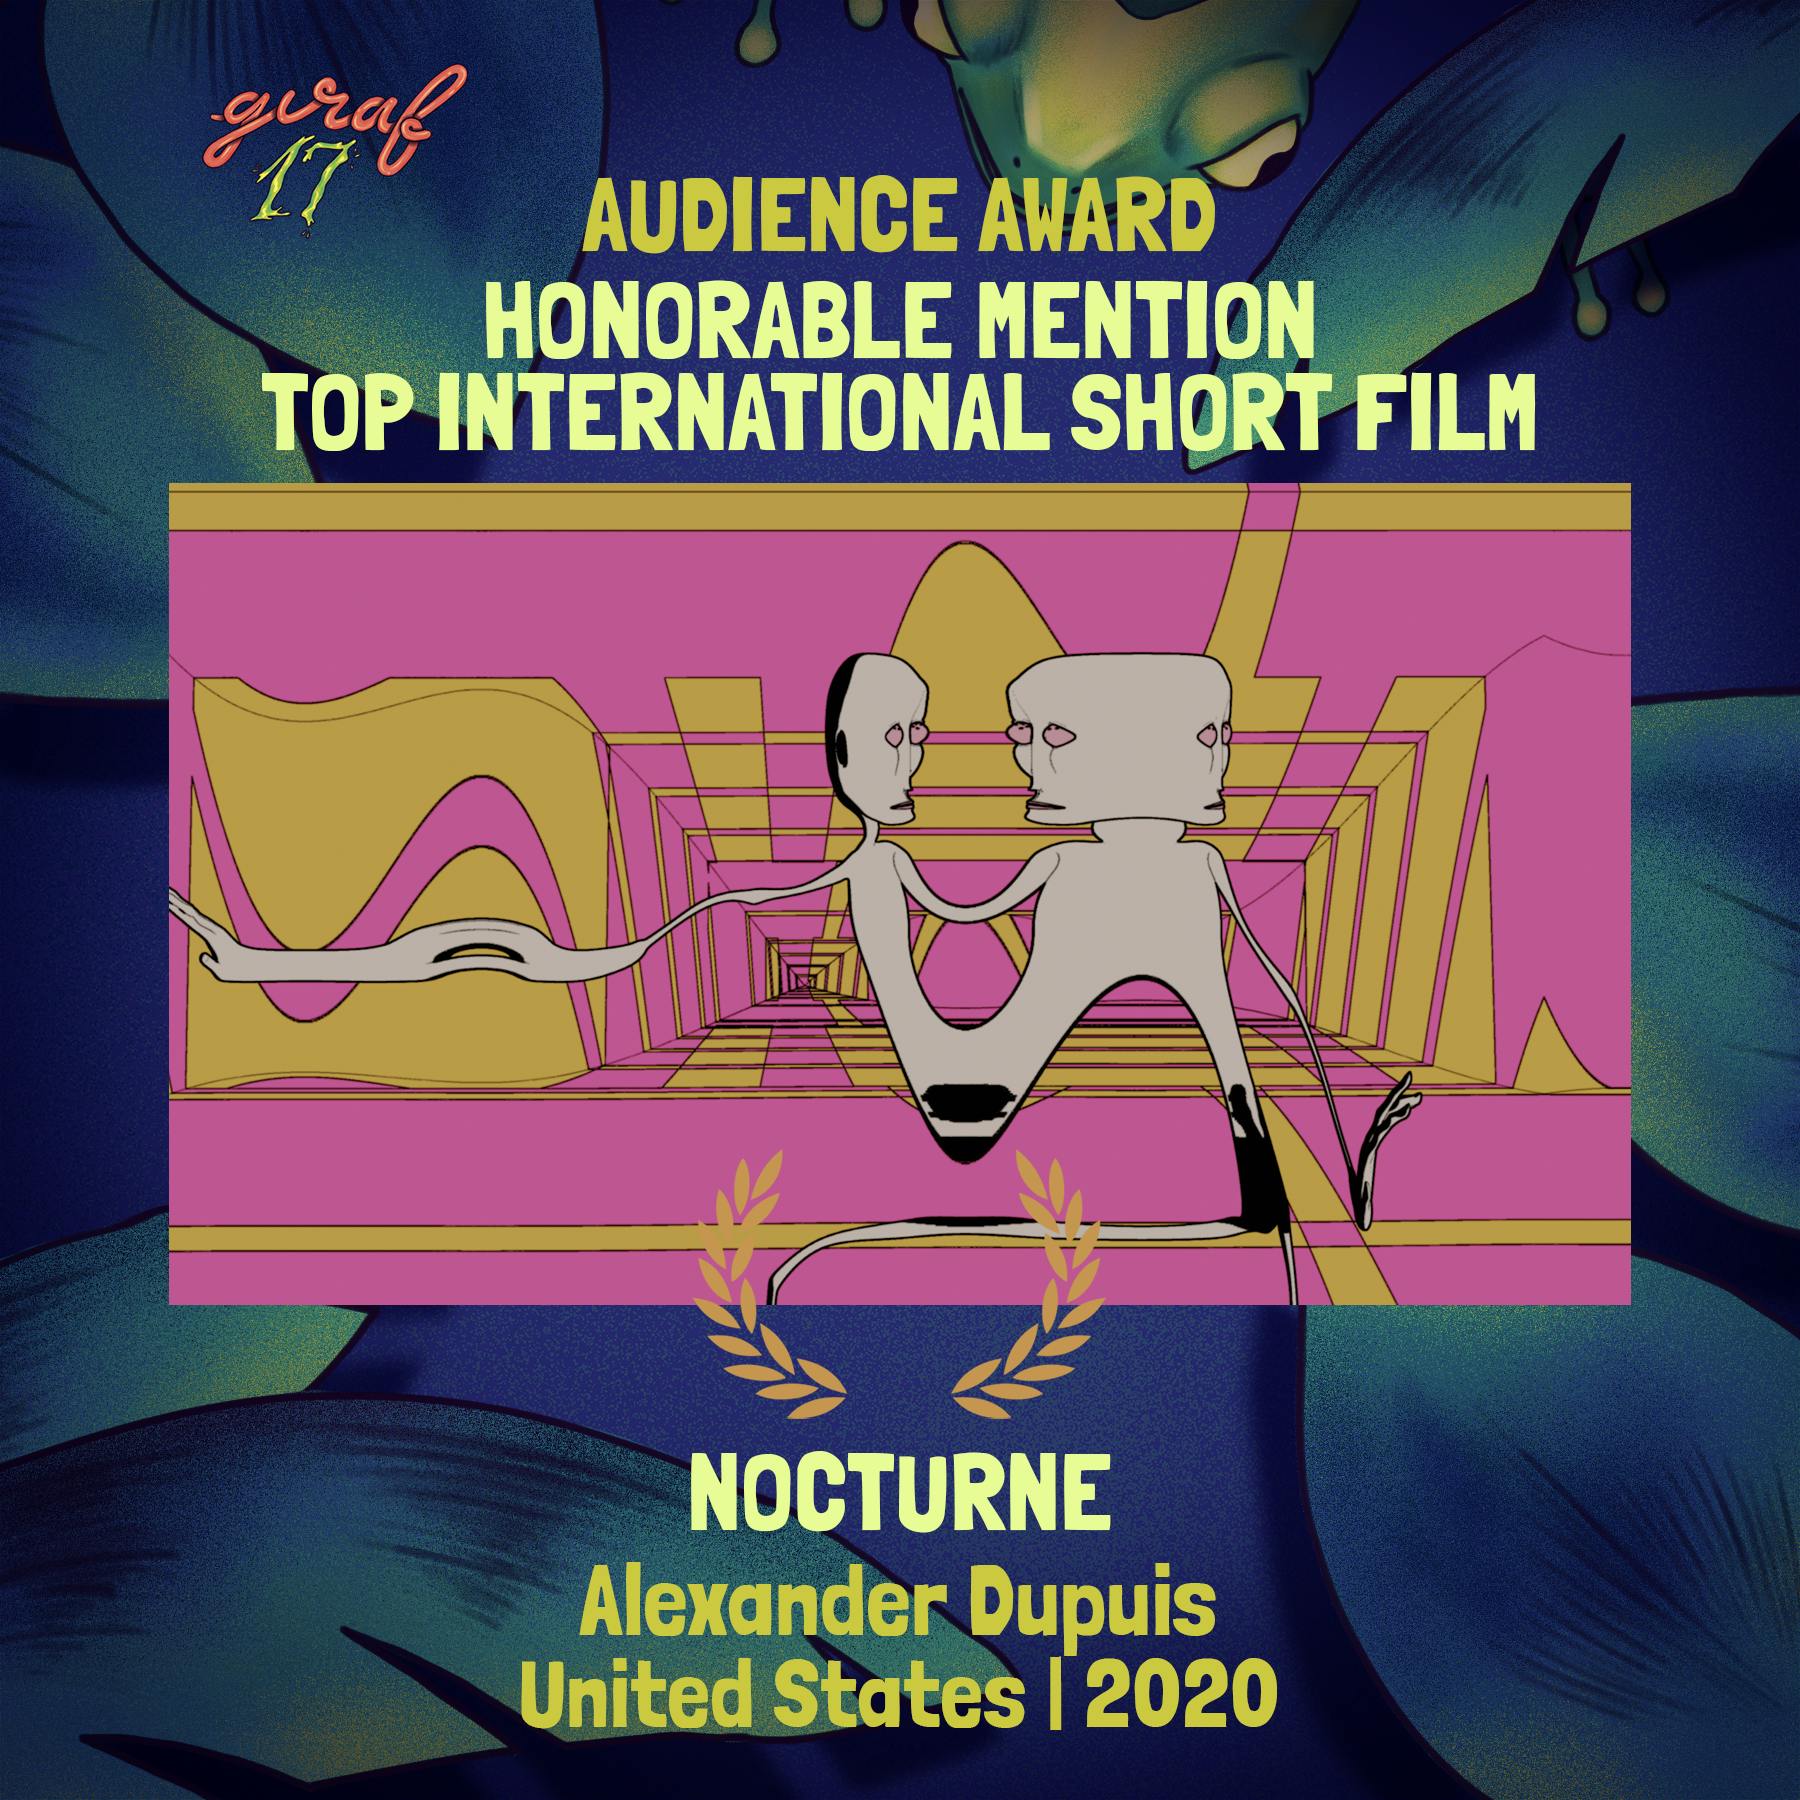 A distorted human figure ripples and stretches in front of a striped pink and yellow background. Surrounding text: GIRAF17 Audience Award: Honorable Mention, Top International Short Film; Nocturne; Alexander Dupuis, United States, 2020